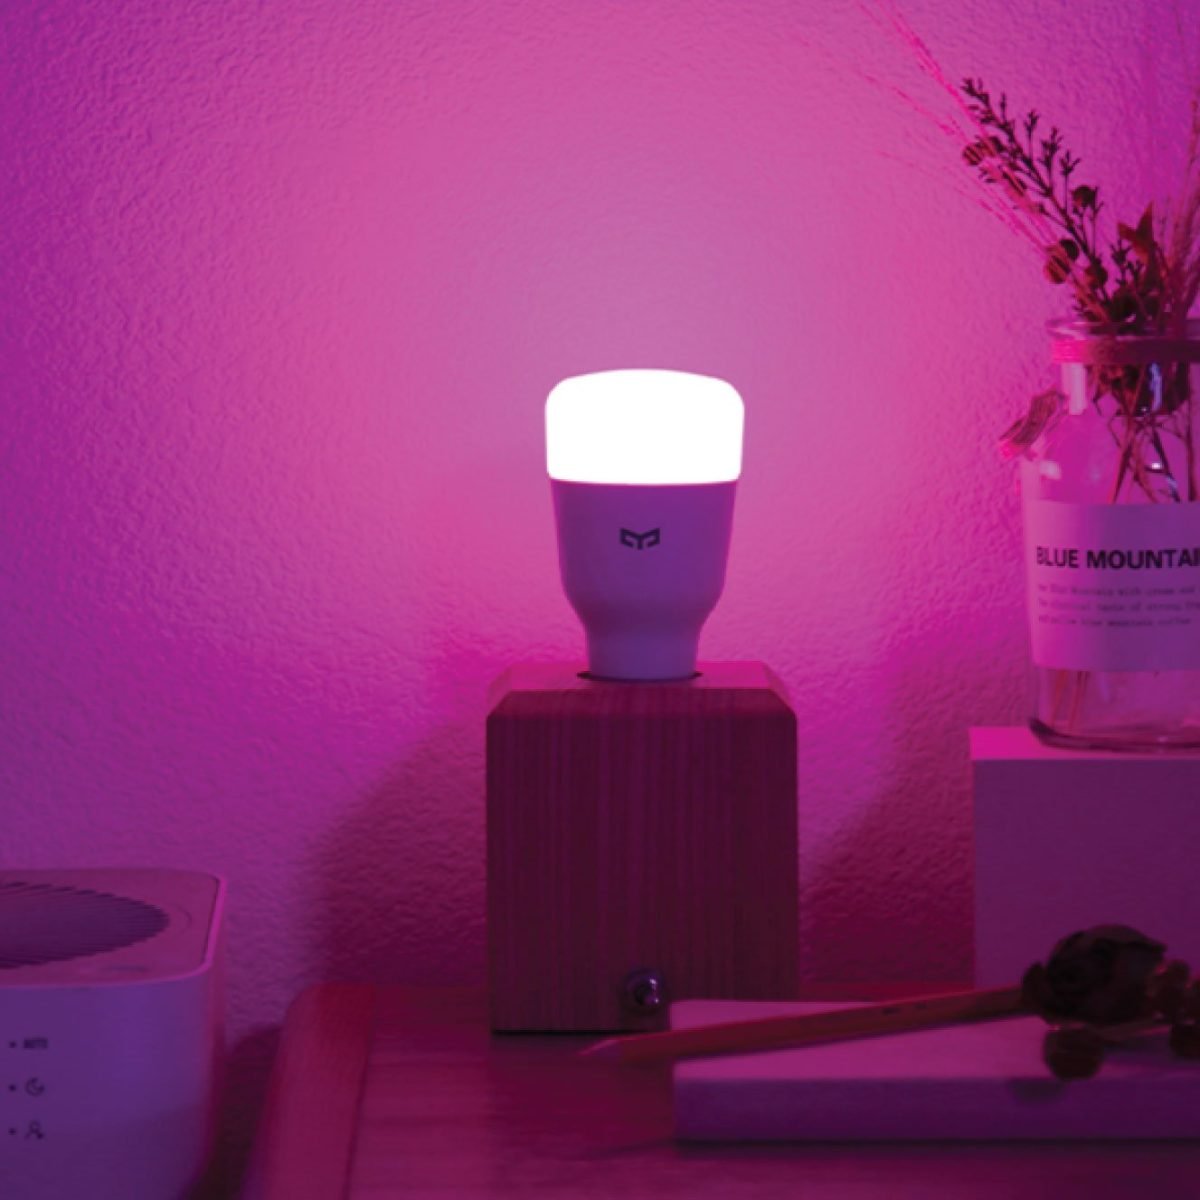 We2Asd3 Xiaomi The Yeelight 1S Rgb Smart Light Bulb Will Allow You To Create Your Own Smart Home. You Can Control It With Your Voice Or Application And Decide With What Temperature And Power It Should Shine. Luminous Flux: 800Lm Color Temperature: 1700K-6500K Lamp Holder: E27 Rated Power: 8.5W &Nbsp; 16 Million Colors Wifi Enabled, Voice Control, App Control, Music Sync &Lt;Img Class=&Quot;Alignnone Wp-Image-8061 Size-Full&Quot; Src=&Quot;Https://Lablaab.com/Wp-Content/Uploads/2020/04/Bulb-27-2-Scaled.jpg&Quot; Alt=&Quot;&Quot; Width=&Quot;2560&Quot; Height=&Quot;357&Quot; /&Gt; &Nbsp; Yeelight Smart Bulb Yeelight Smart Bulb 1S (Color)